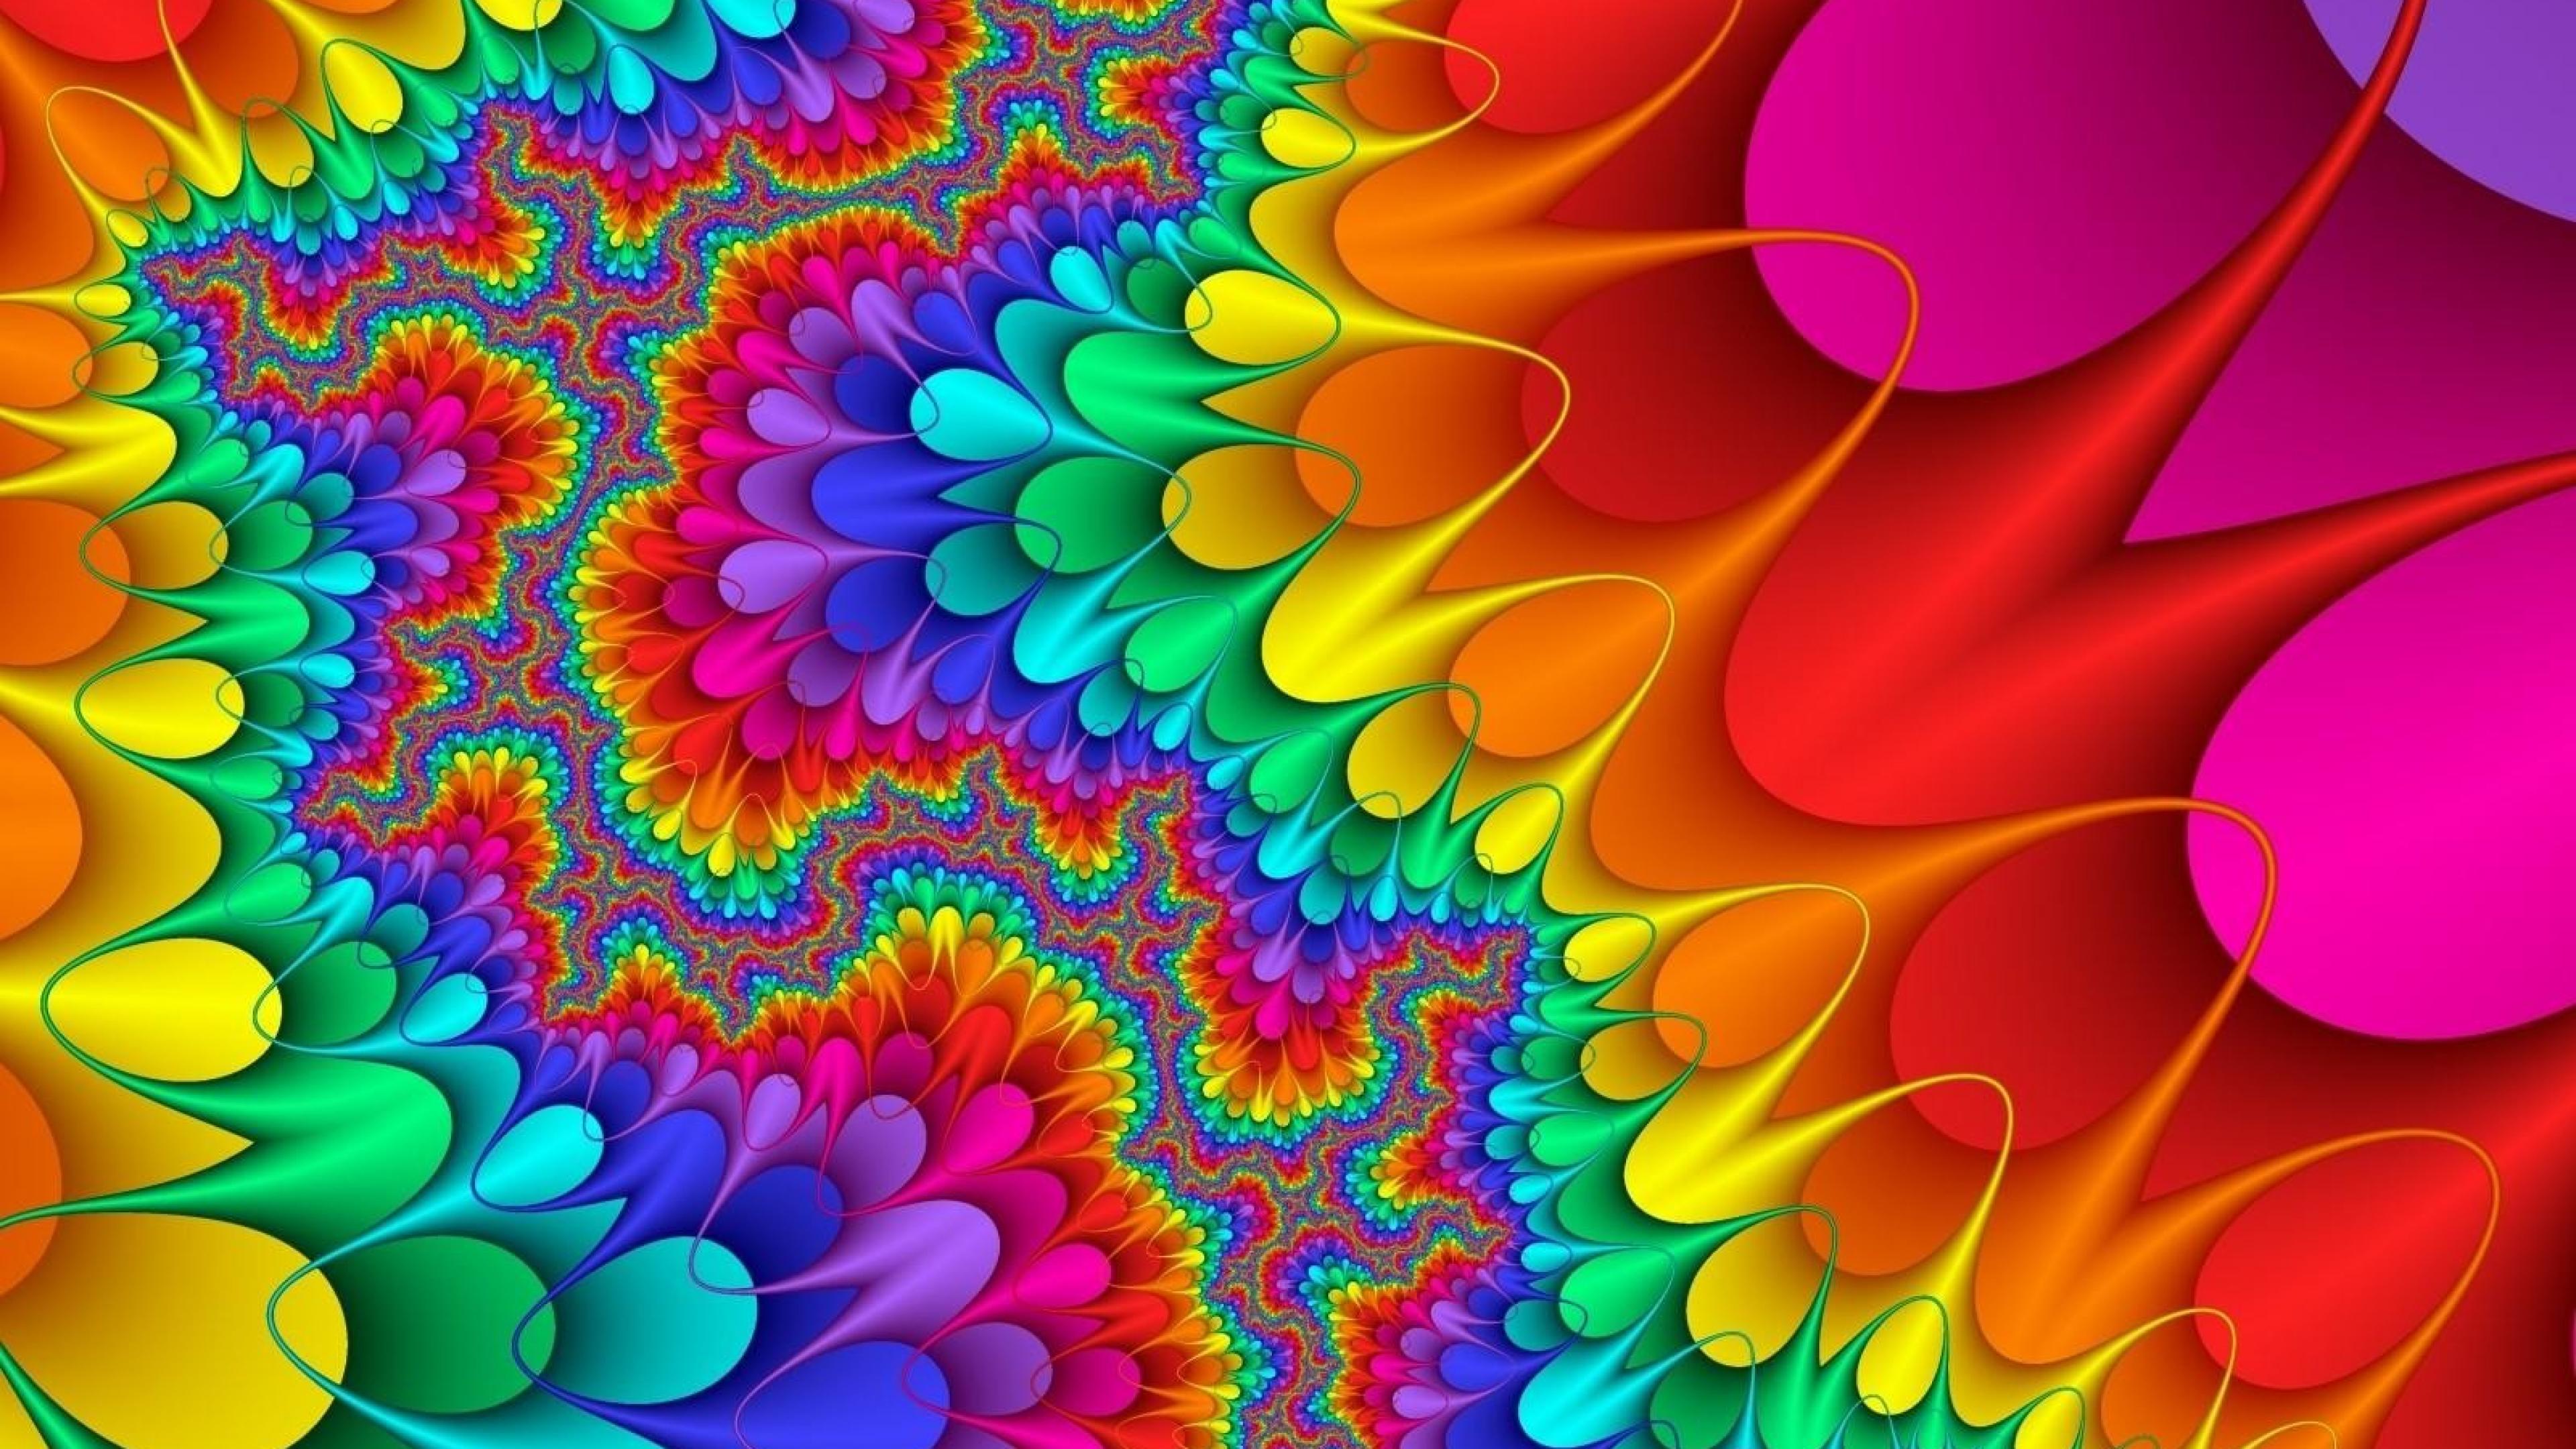 Abstract Wallpaper with Palette Fractal in Colorful HD Wallpapers